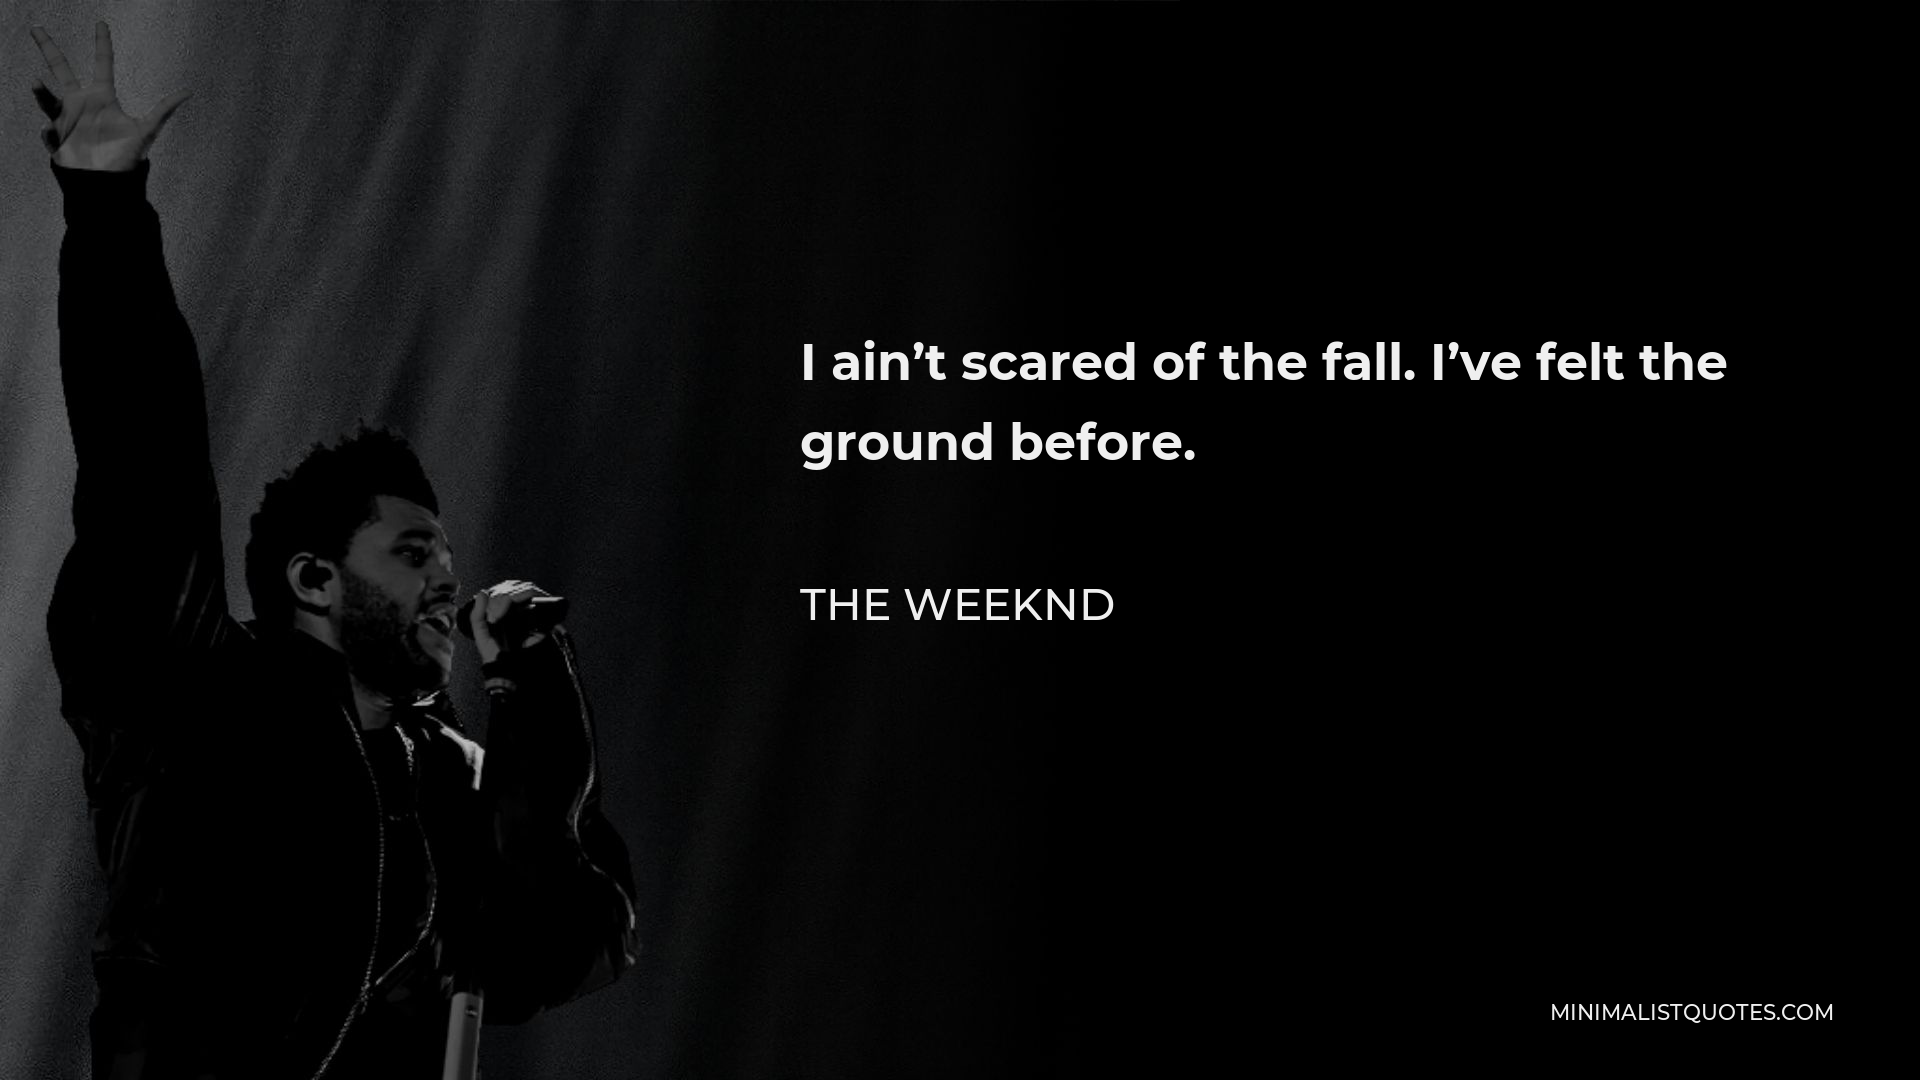 The Weeknd Quote - I ain’t scared of the fall. I’ve felt the ground before.